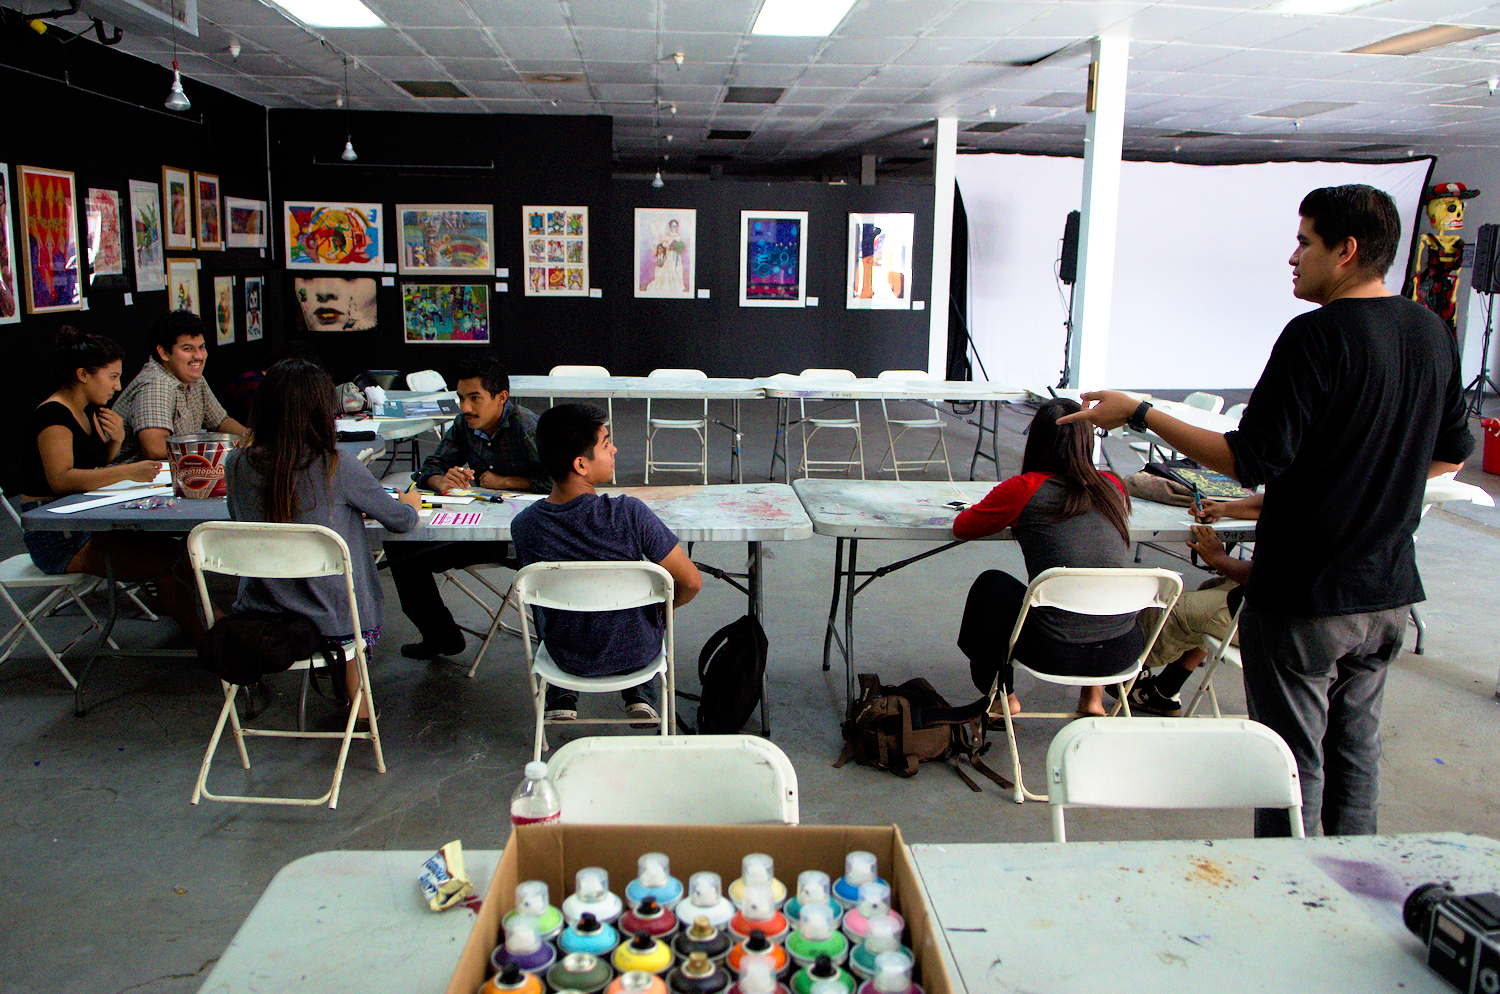  The Self Help Graphics center is also a major and long lasting actor in the printmaking scene. Located downtown, this center actively serves the local Latino community through collective open courses to initiate young and emerging artists. 